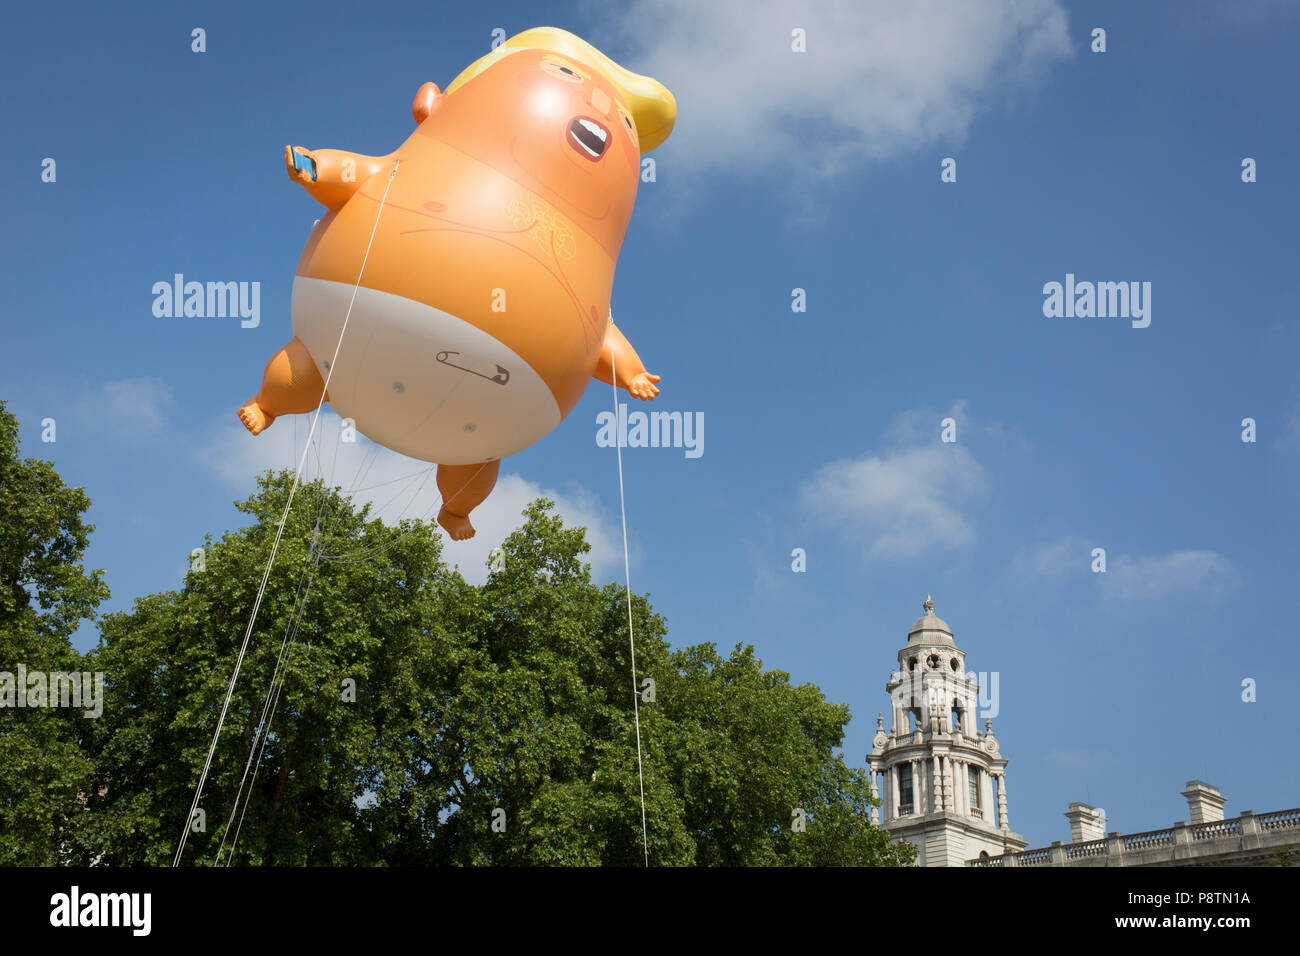 London, UK. 13th July, 2018. The inflatable balloon called Baby Trump flies above Parliament Square in Westminster, the seat of the UK Parliament, during the US President's visit to the UK. Baby Trump is a 20ft high orange blimp depicting the US President as an enraged, smartphone-clutching infant - and given special permission to appear above the capital by London Mayor Sadiq Khan because of its protest rather than artistic nature. It is the brainchild of Graphic designer Matt Bonner. Credit: RichardBaker/Alamy Live News Stock Photo